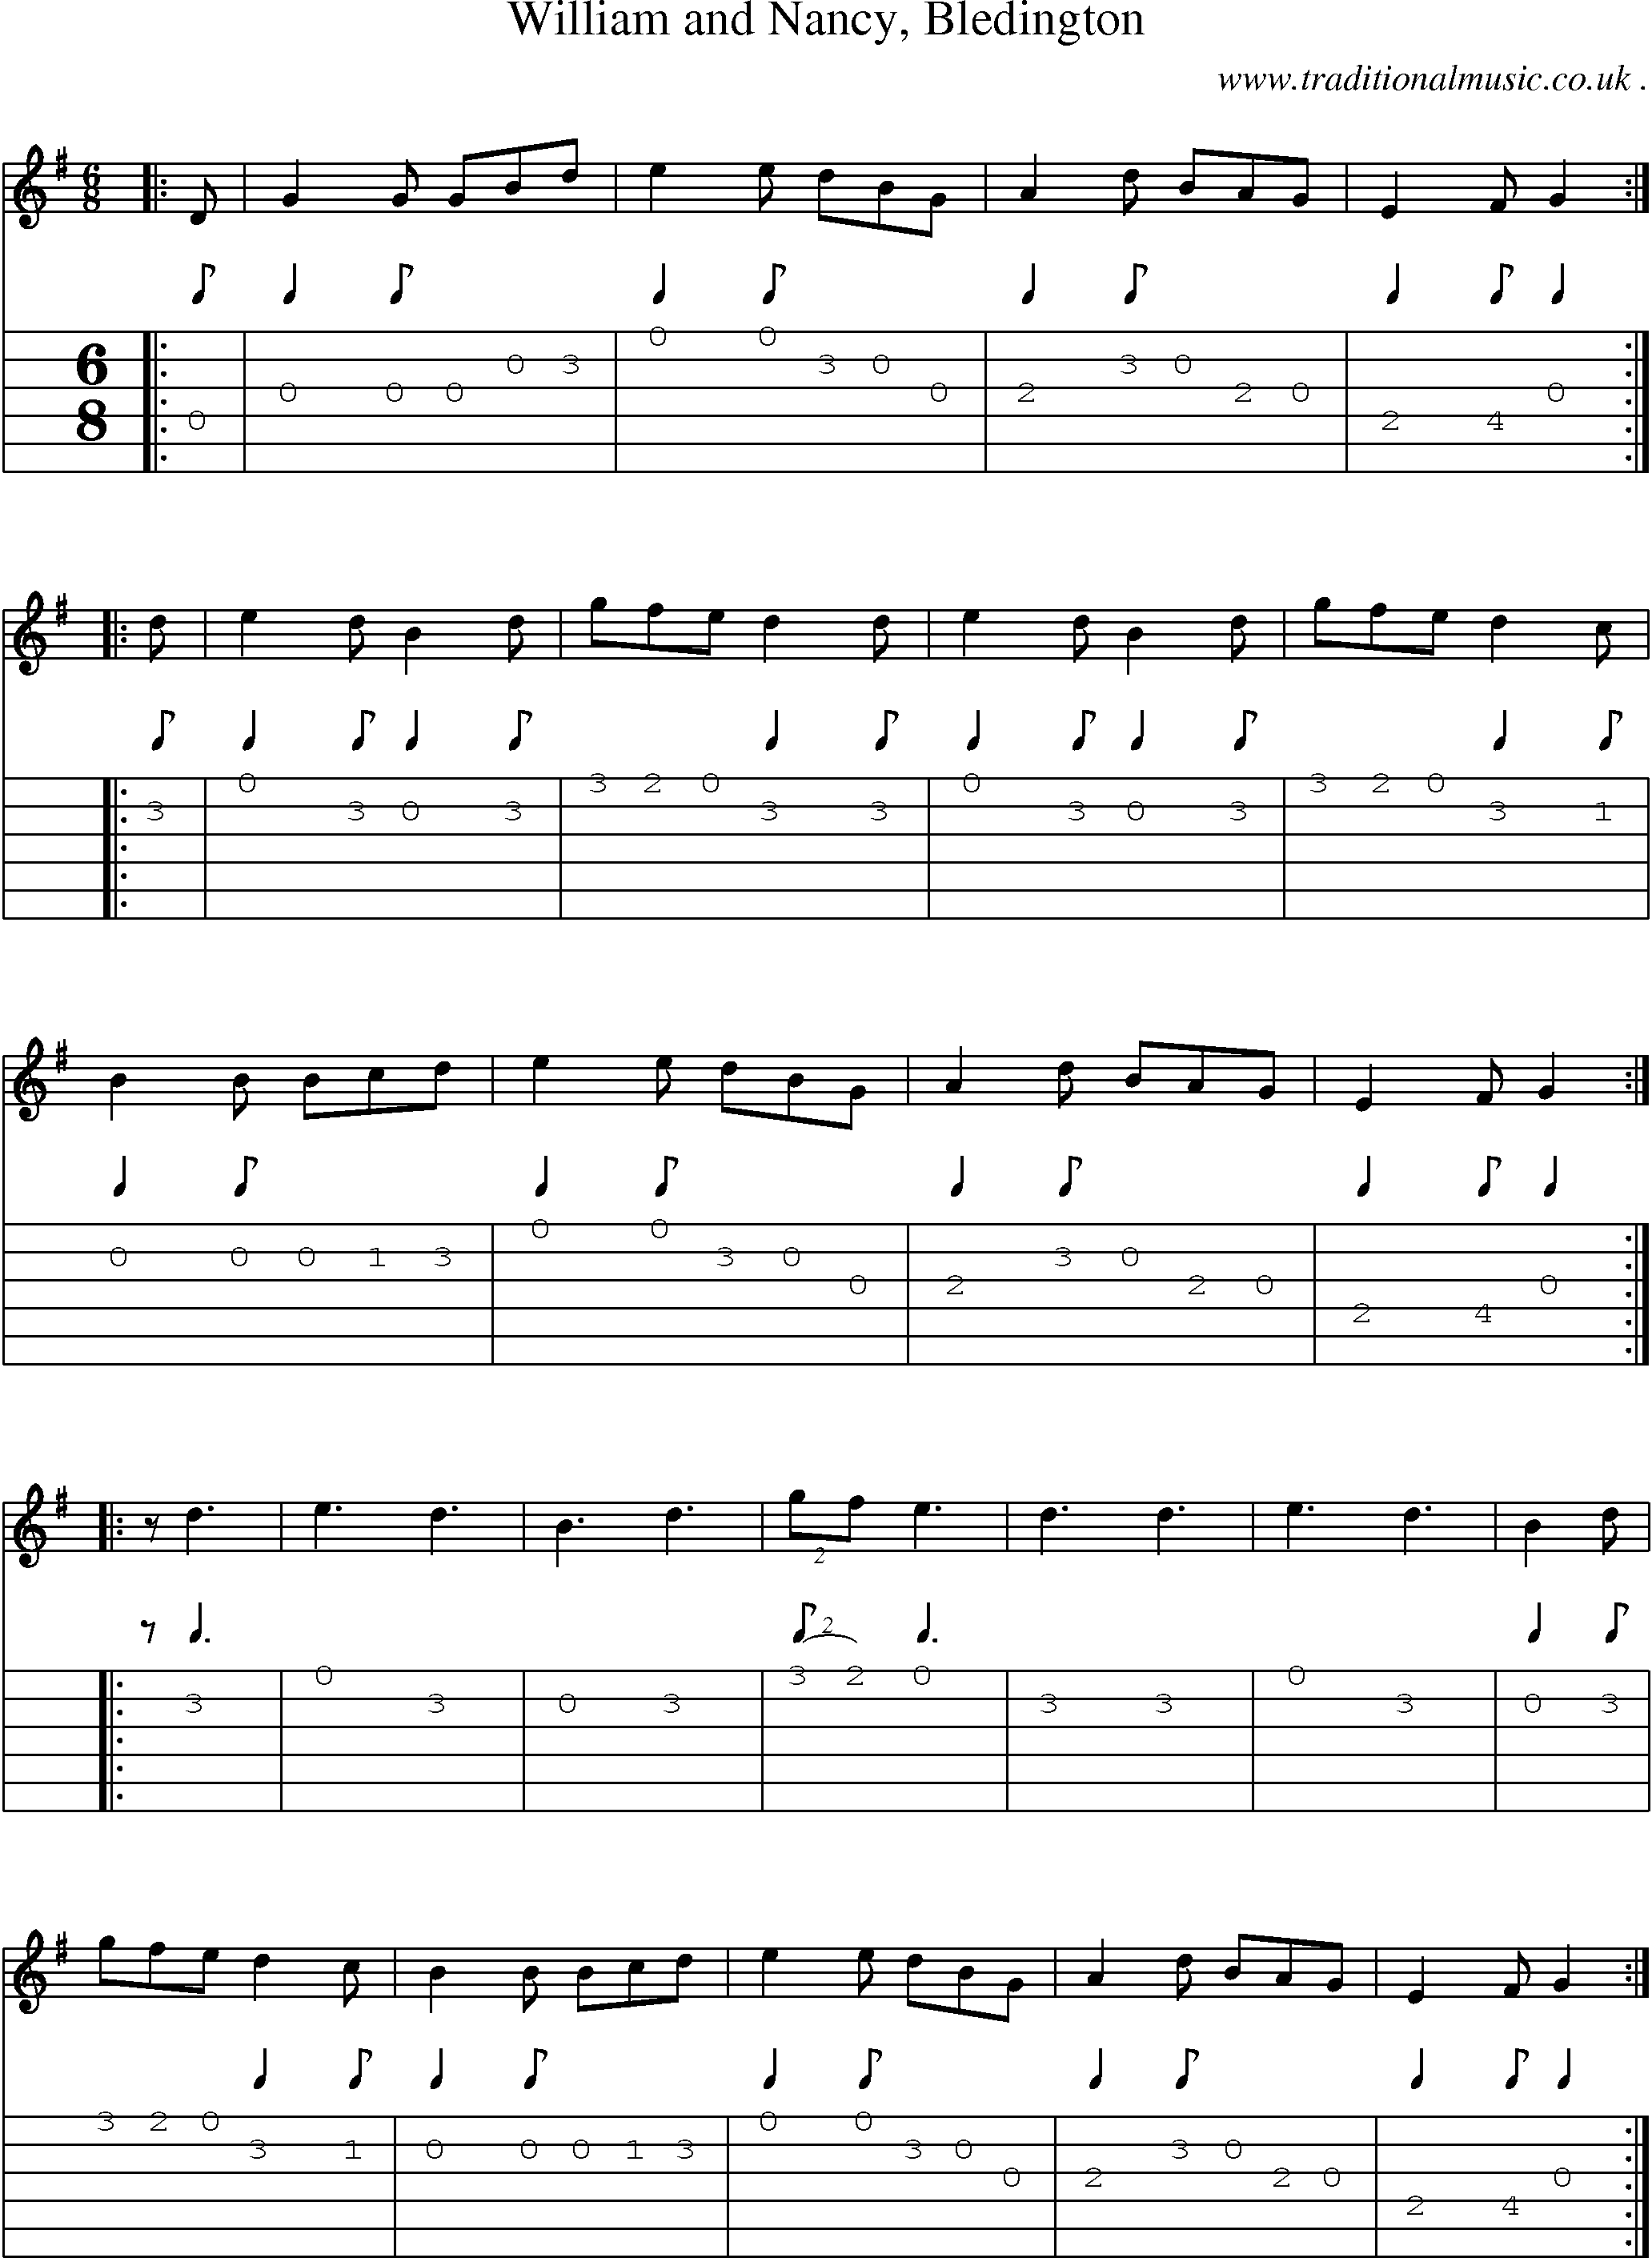 Sheet-Music and Guitar Tabs for William And Nancy Bledington